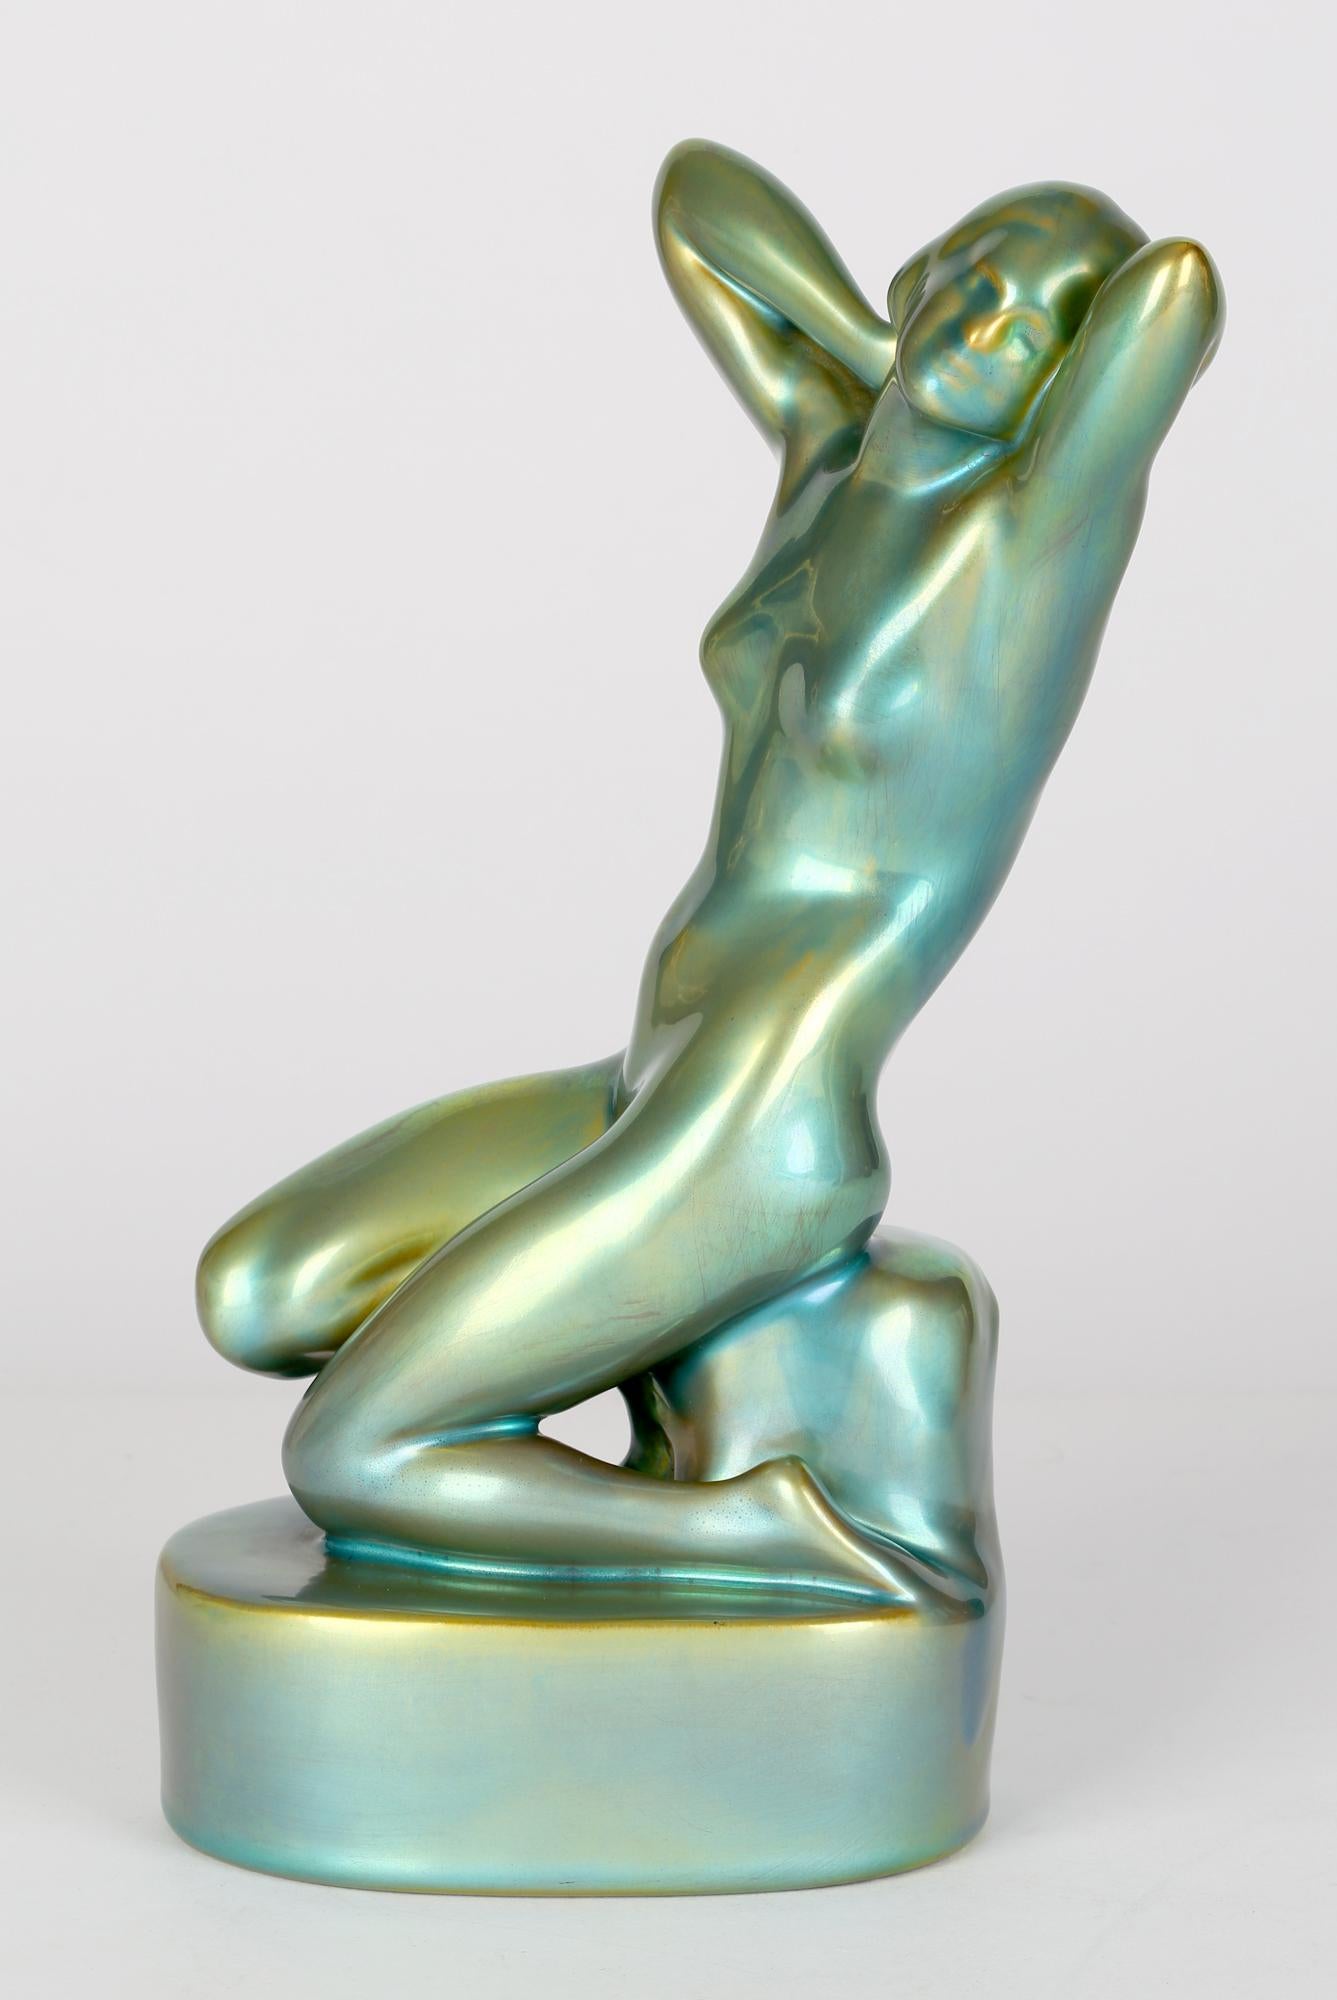 A very fine Art Deco Hungarian art pottery sculptural nude figurine in eosin metallic green glazes dating from around 1930. The figure is mounted on an oval shape base and sits on a rock and kneels on one leg holding her hands behind her head. The